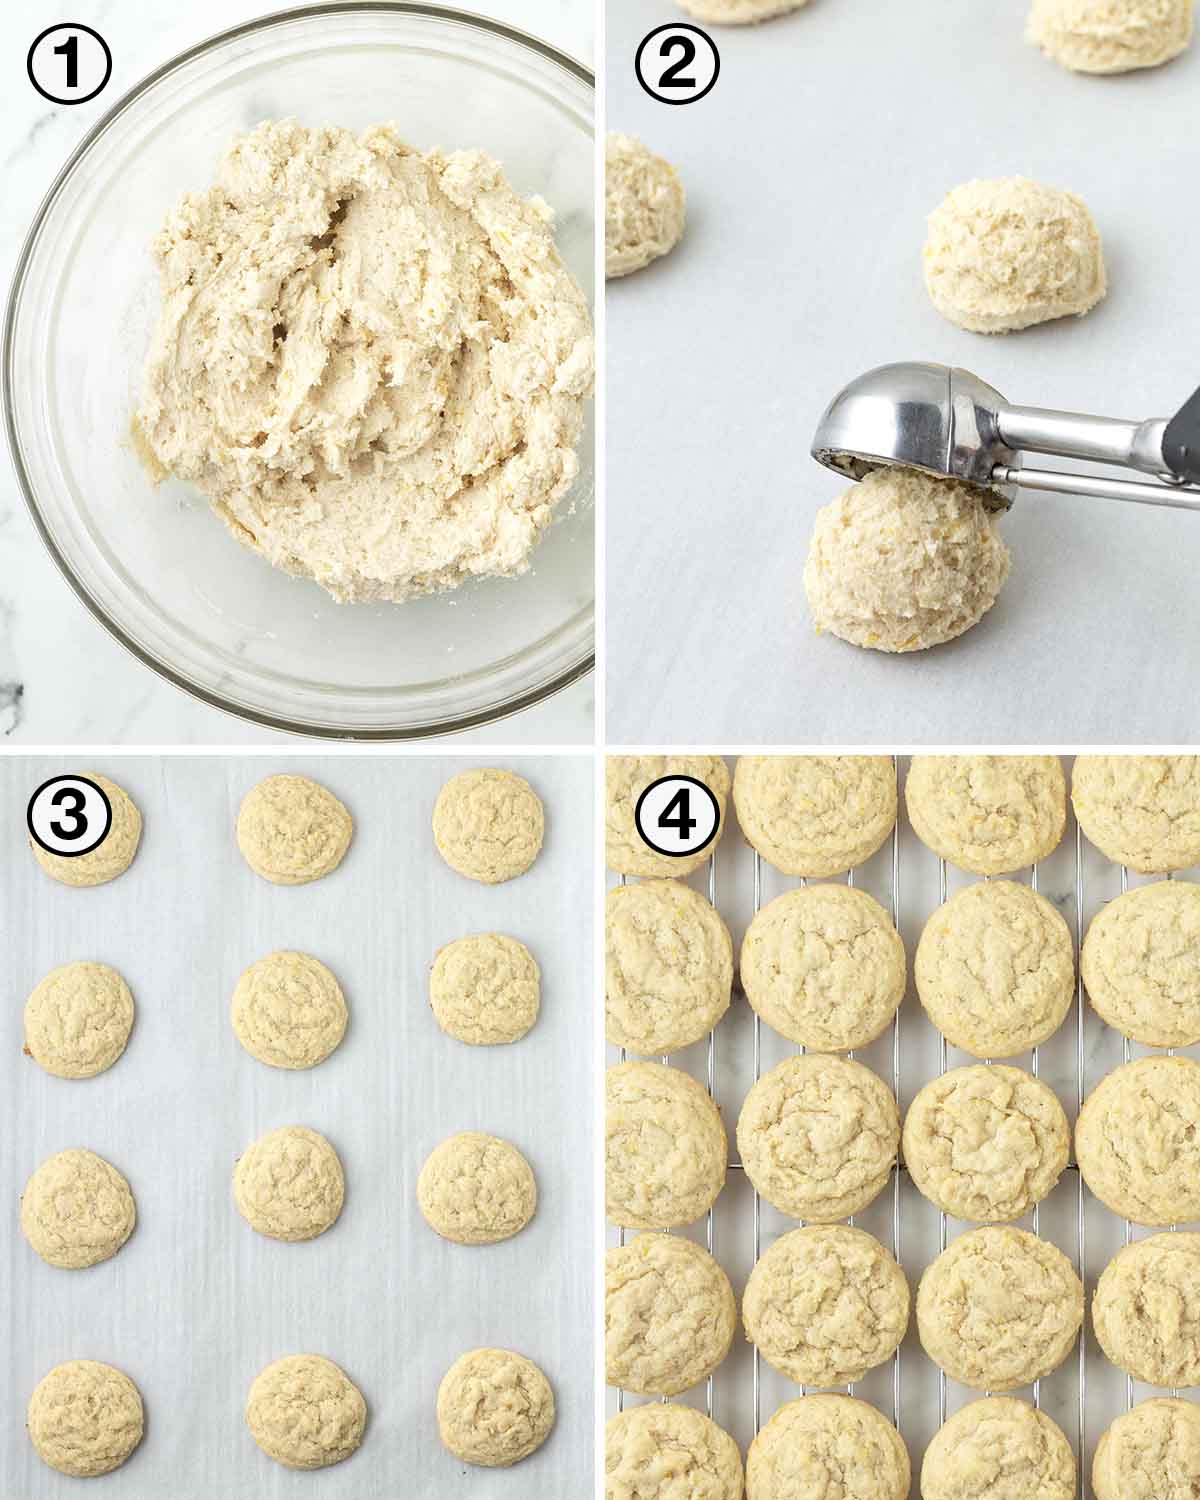 A collage of four images showing the sequence of steps needed to make vegan lemon cookies.